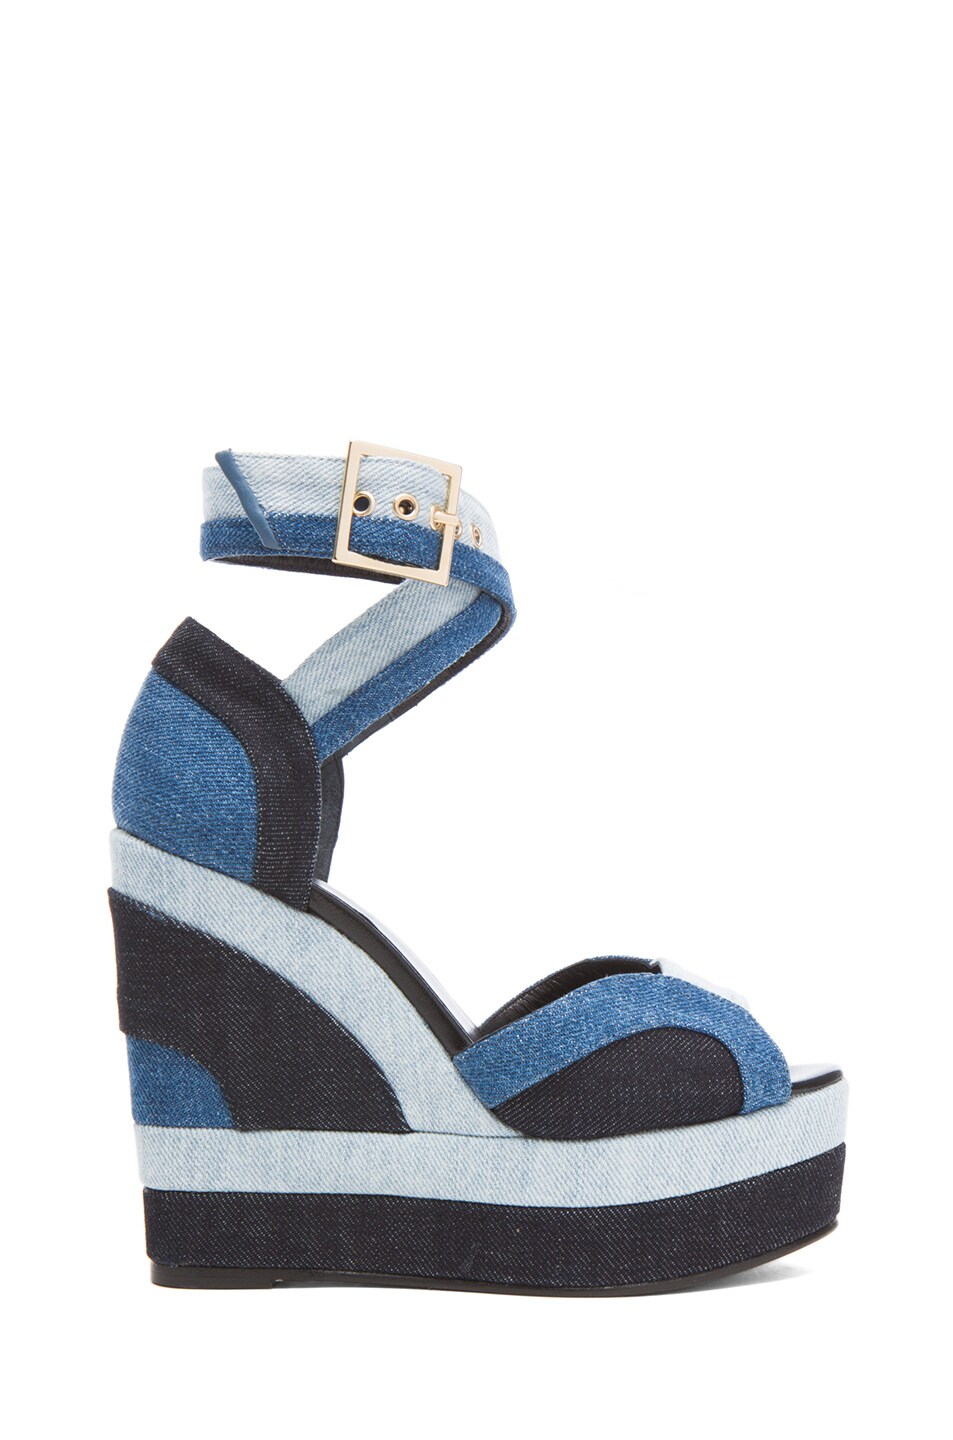 Image 1 of Pierre Hardy Denim Wedge Sandals in Jeans